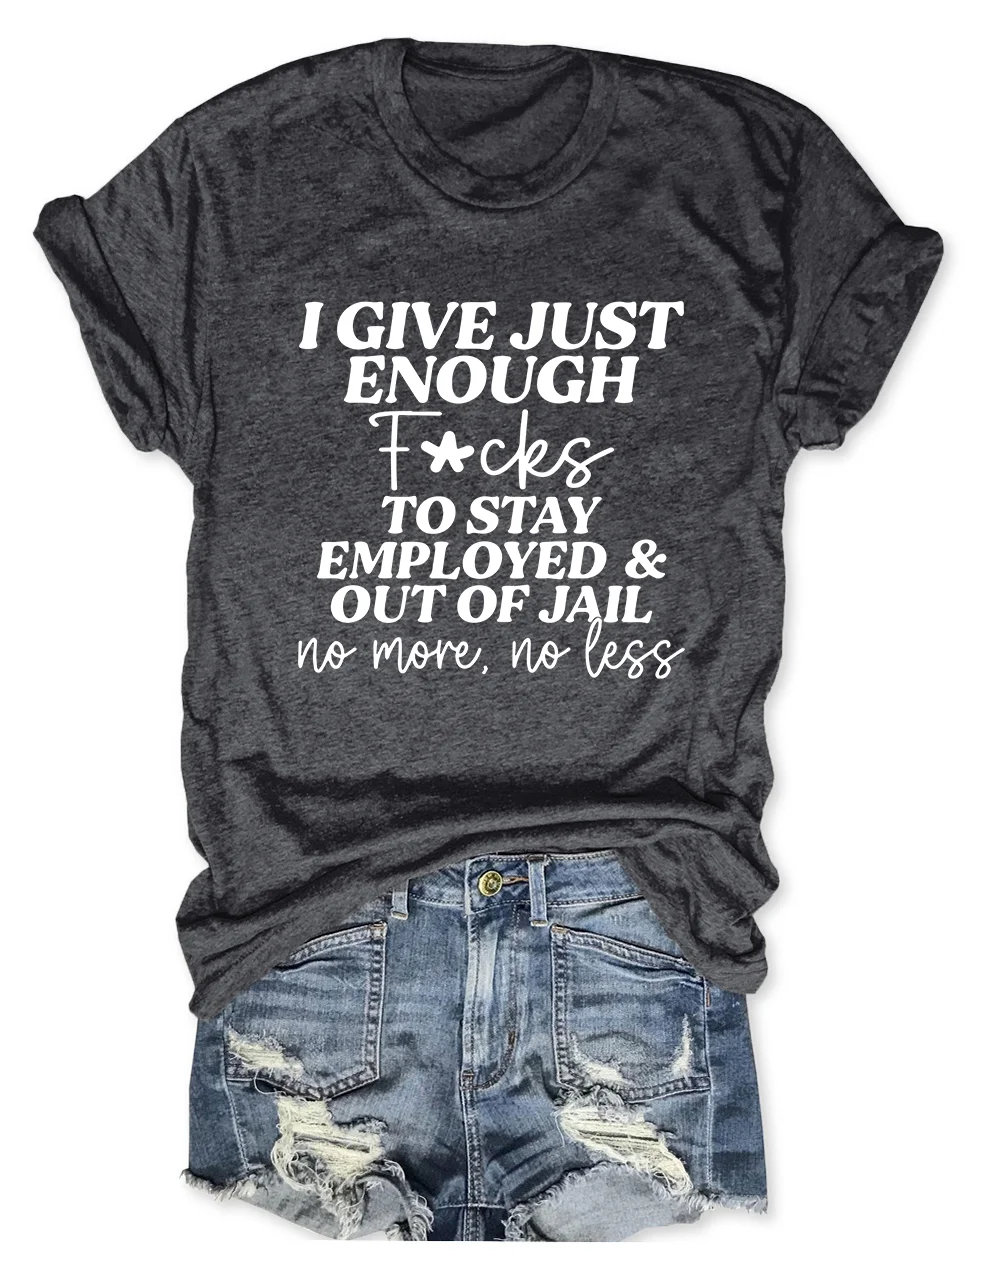 I Give Just Enough To Stay T-Shirt